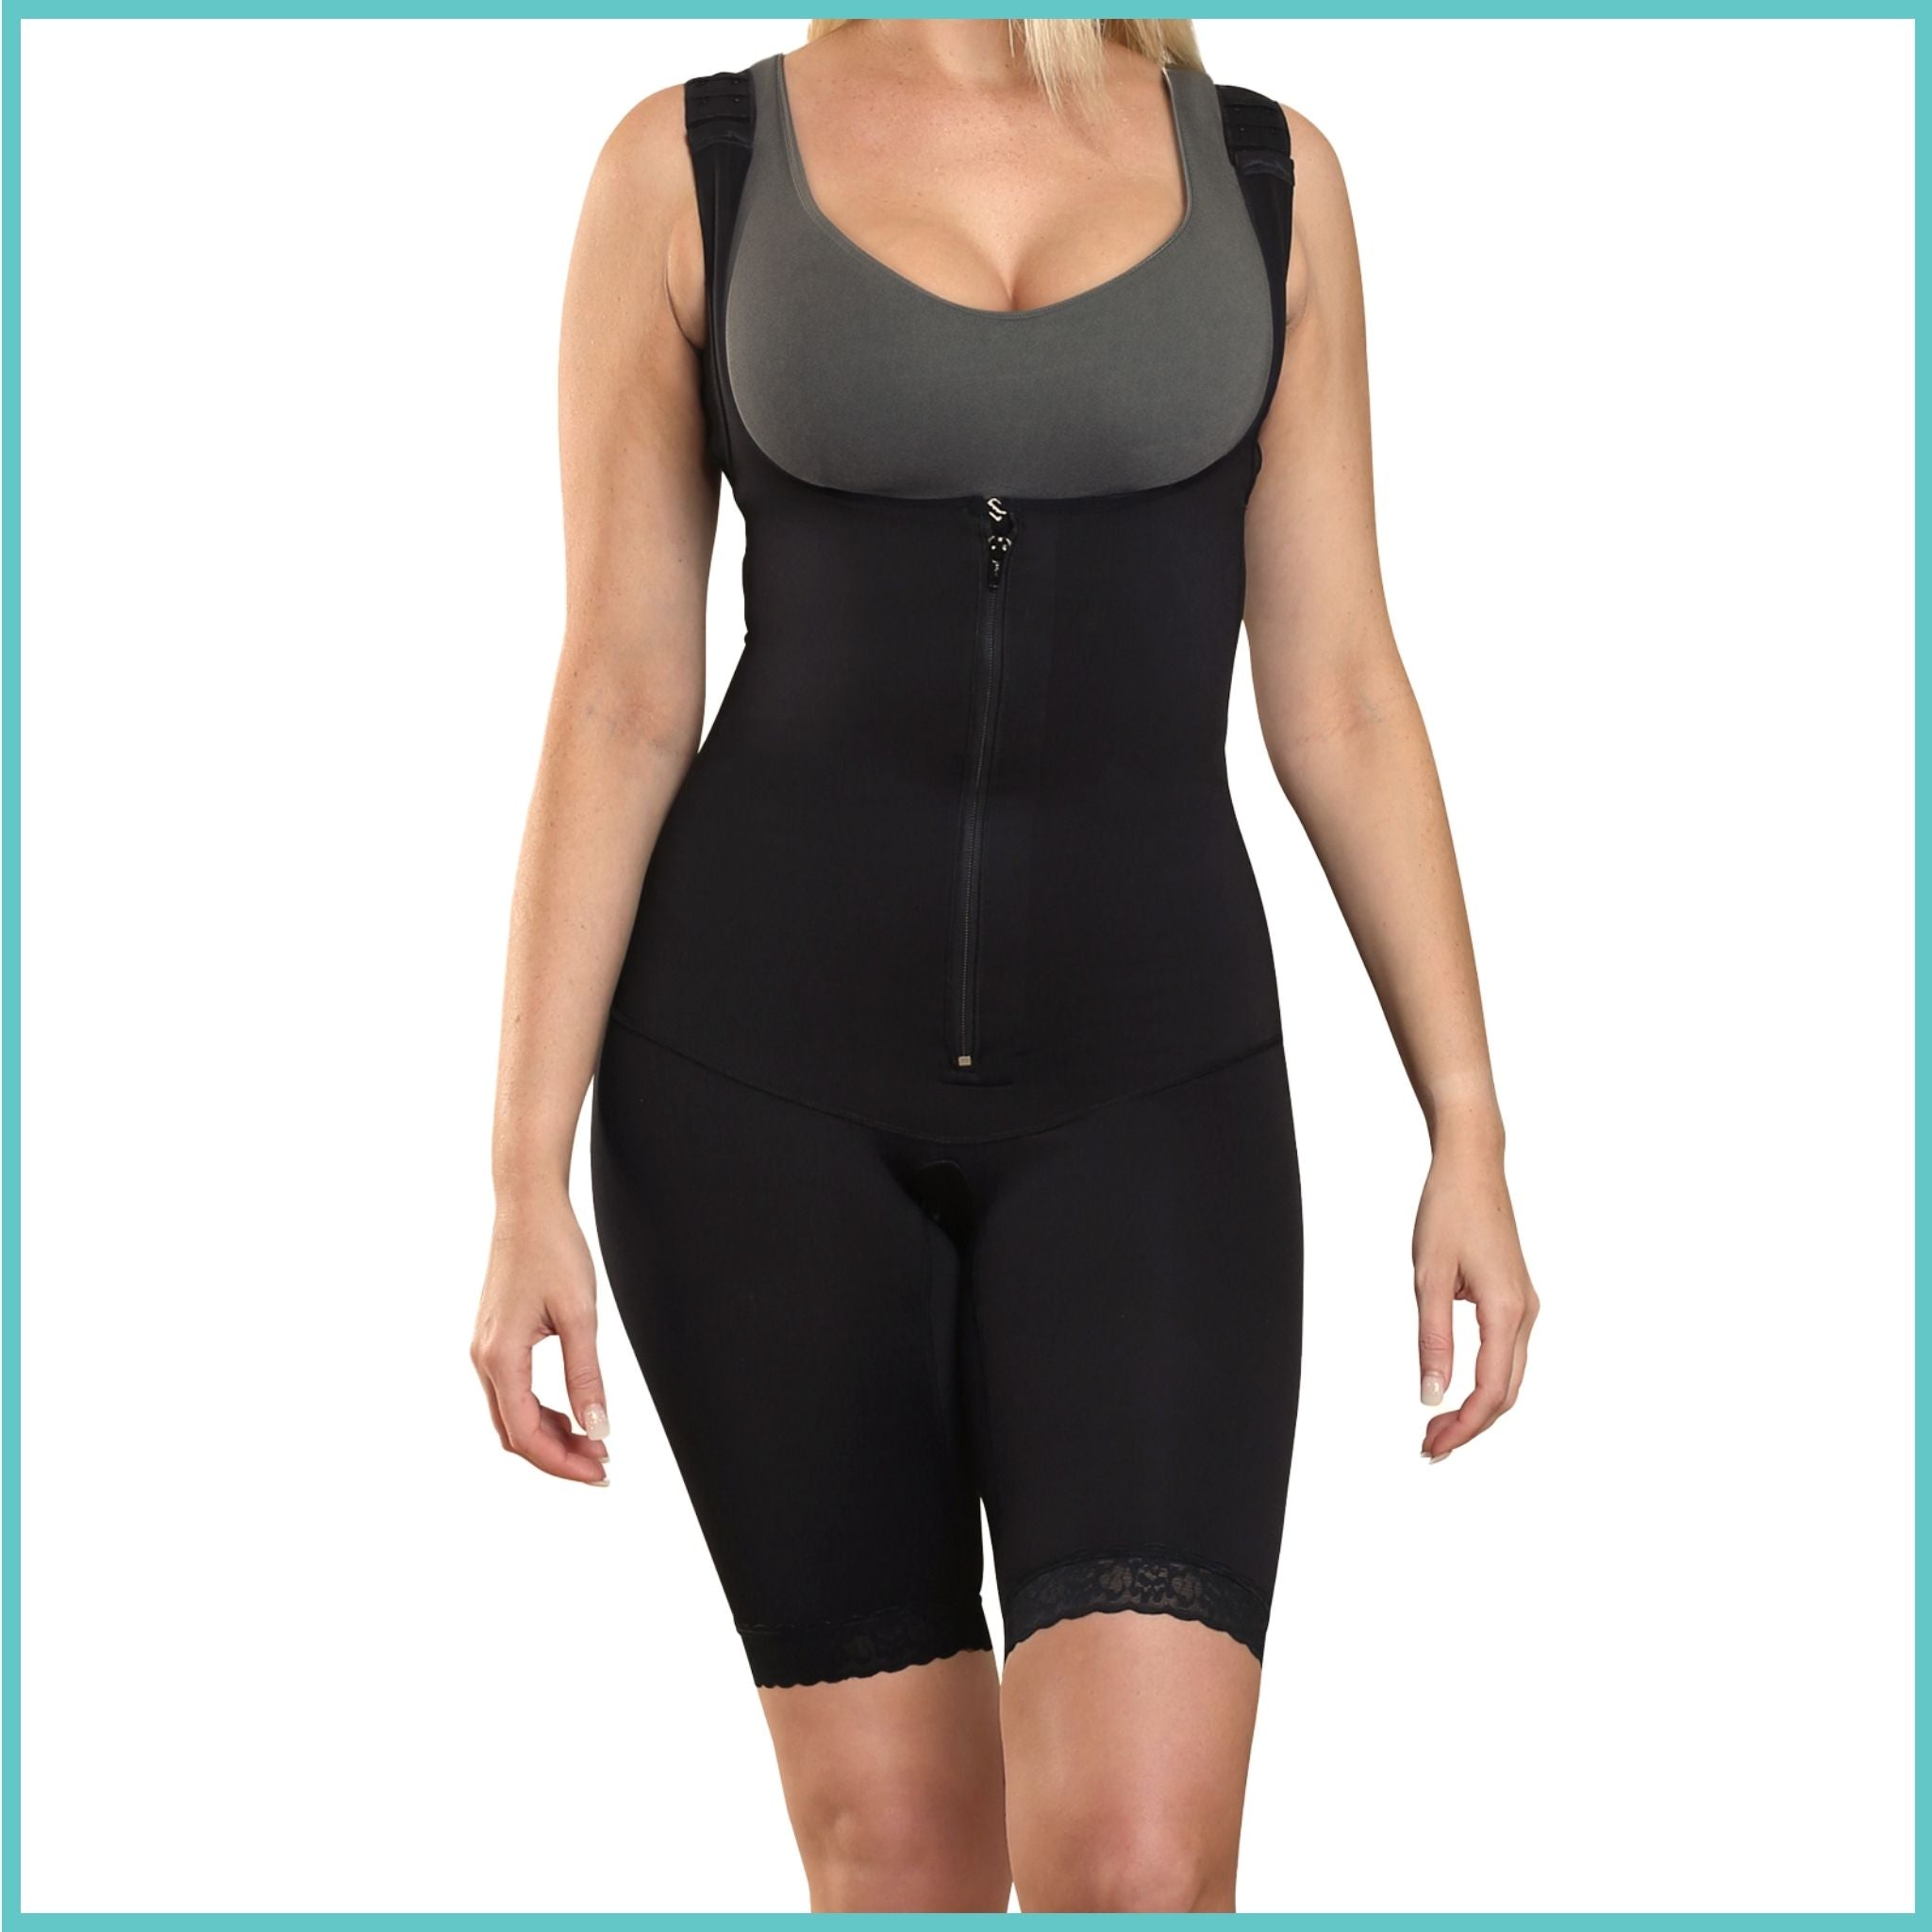 Wholesale bbl shapewear To Create Slim And Fit Looking Silhouettes 